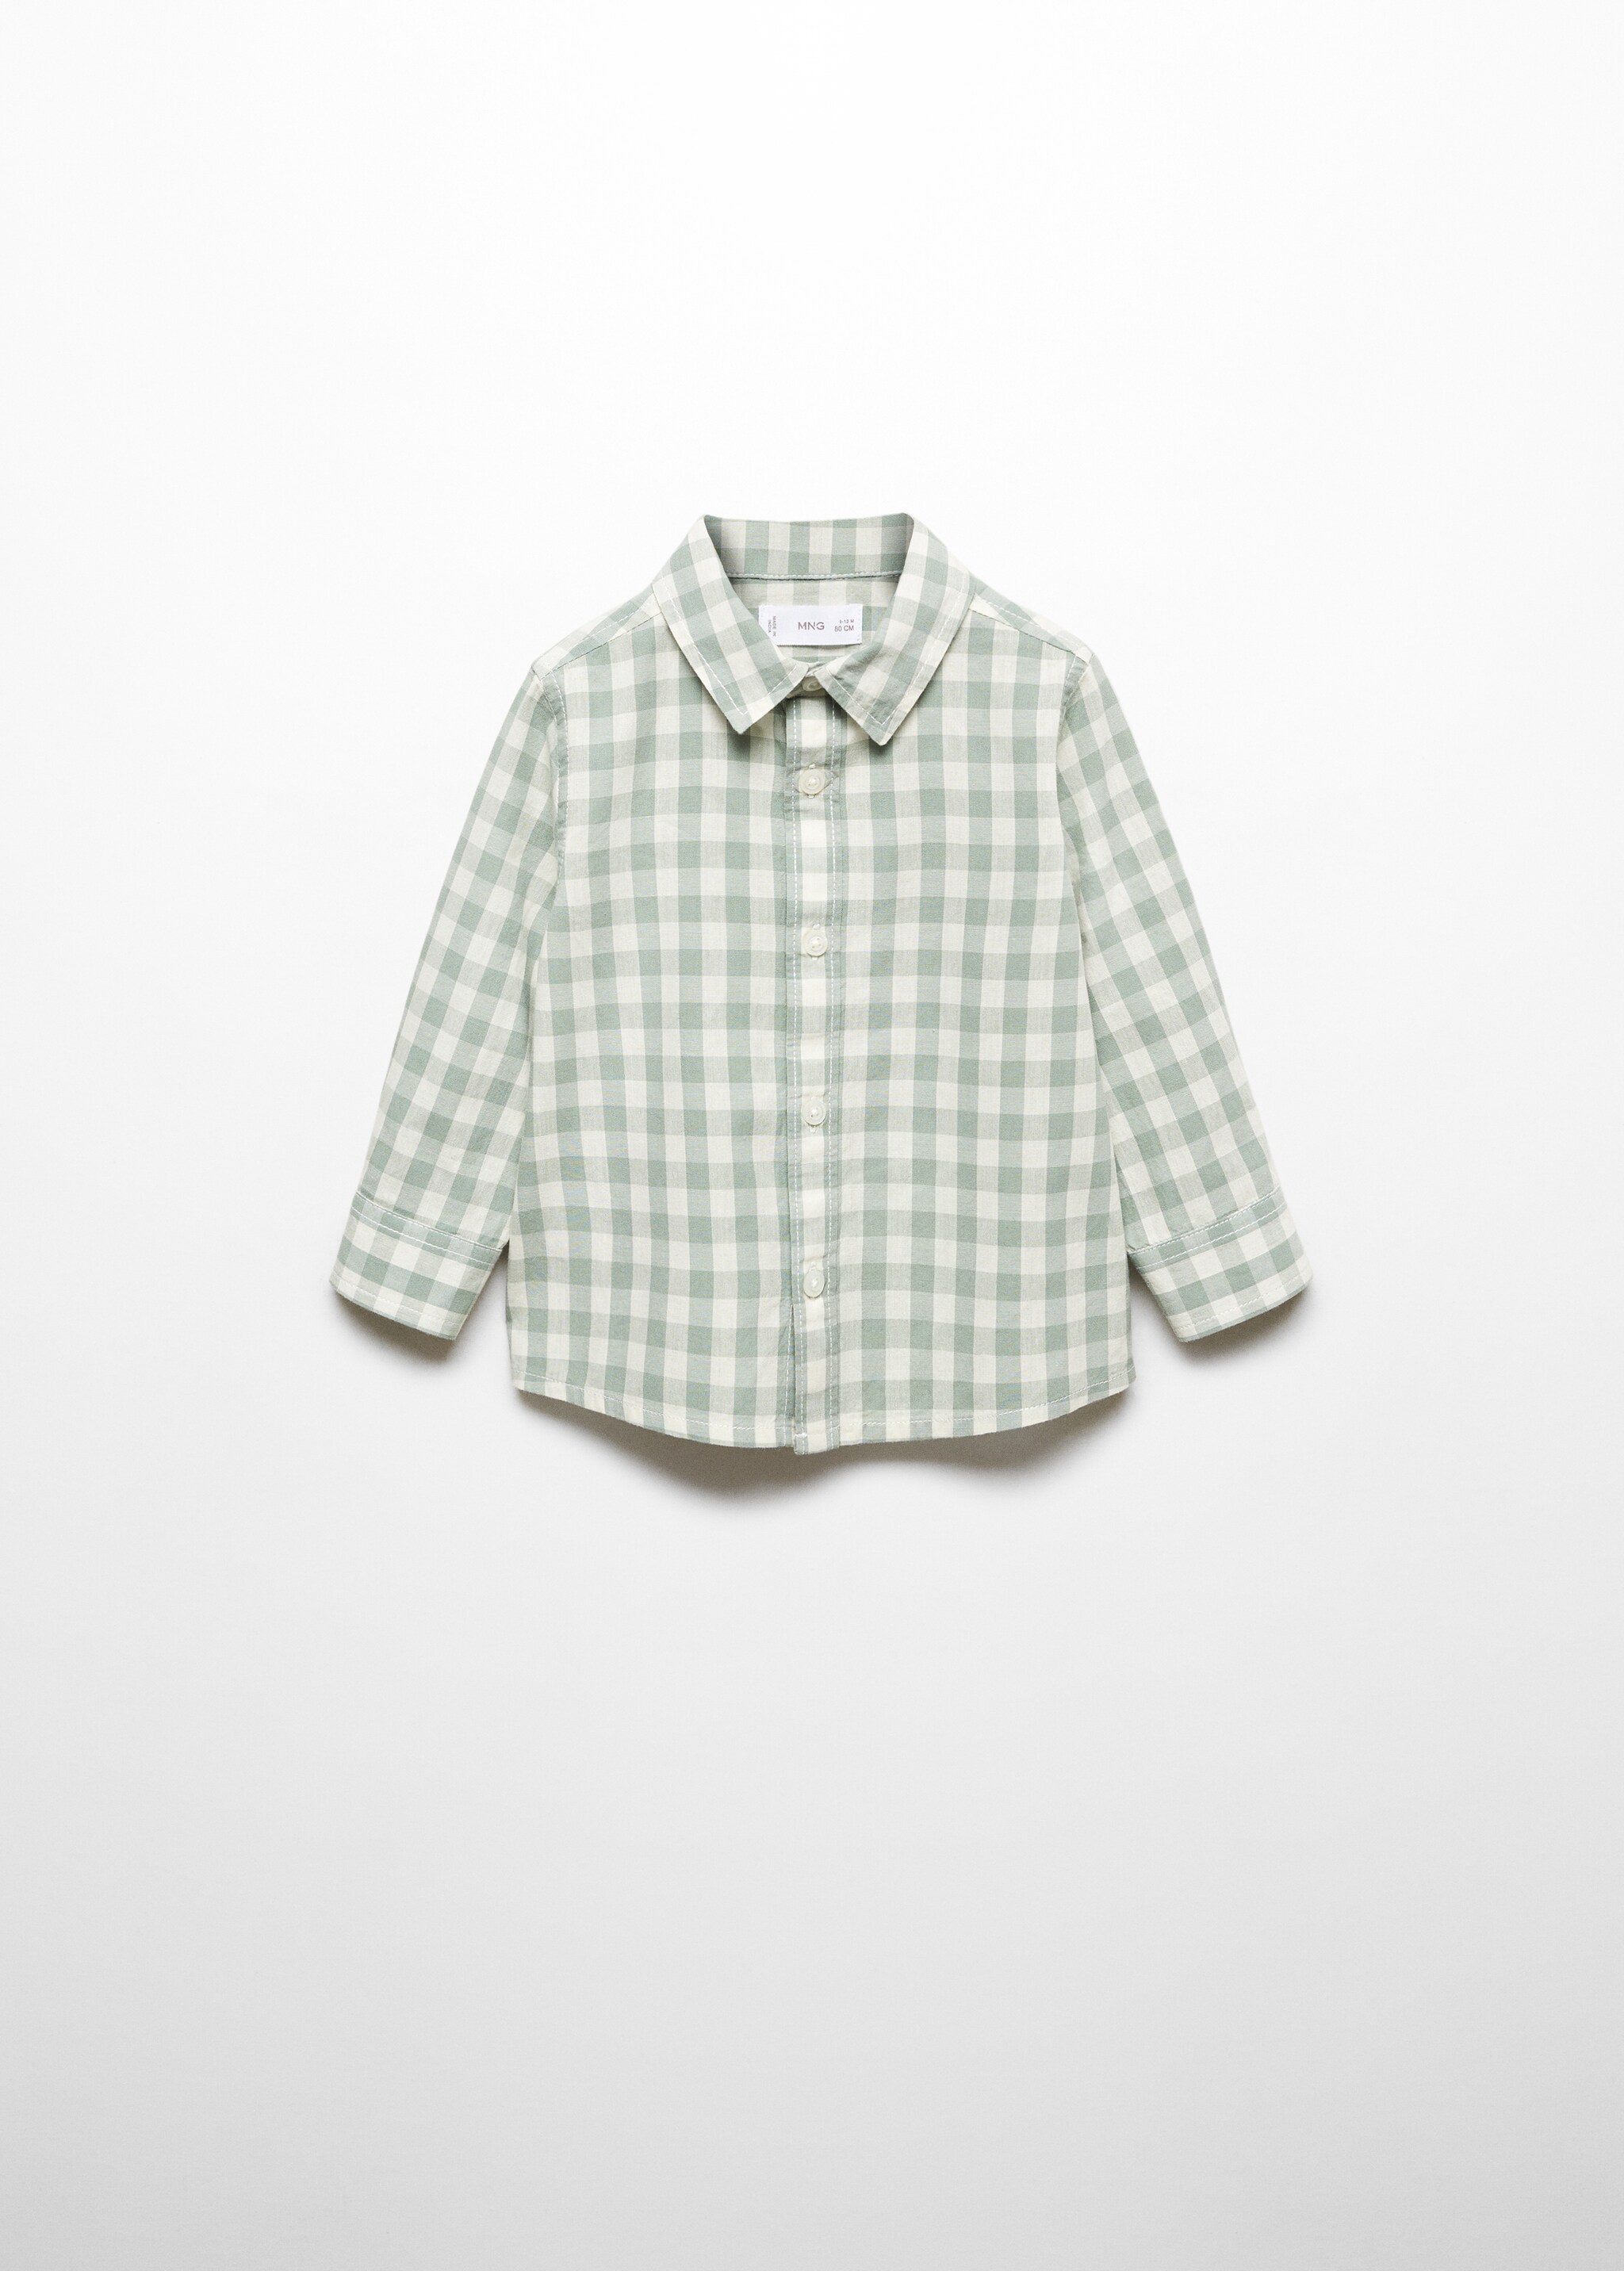 Gingham check cotton shirt - Article without model